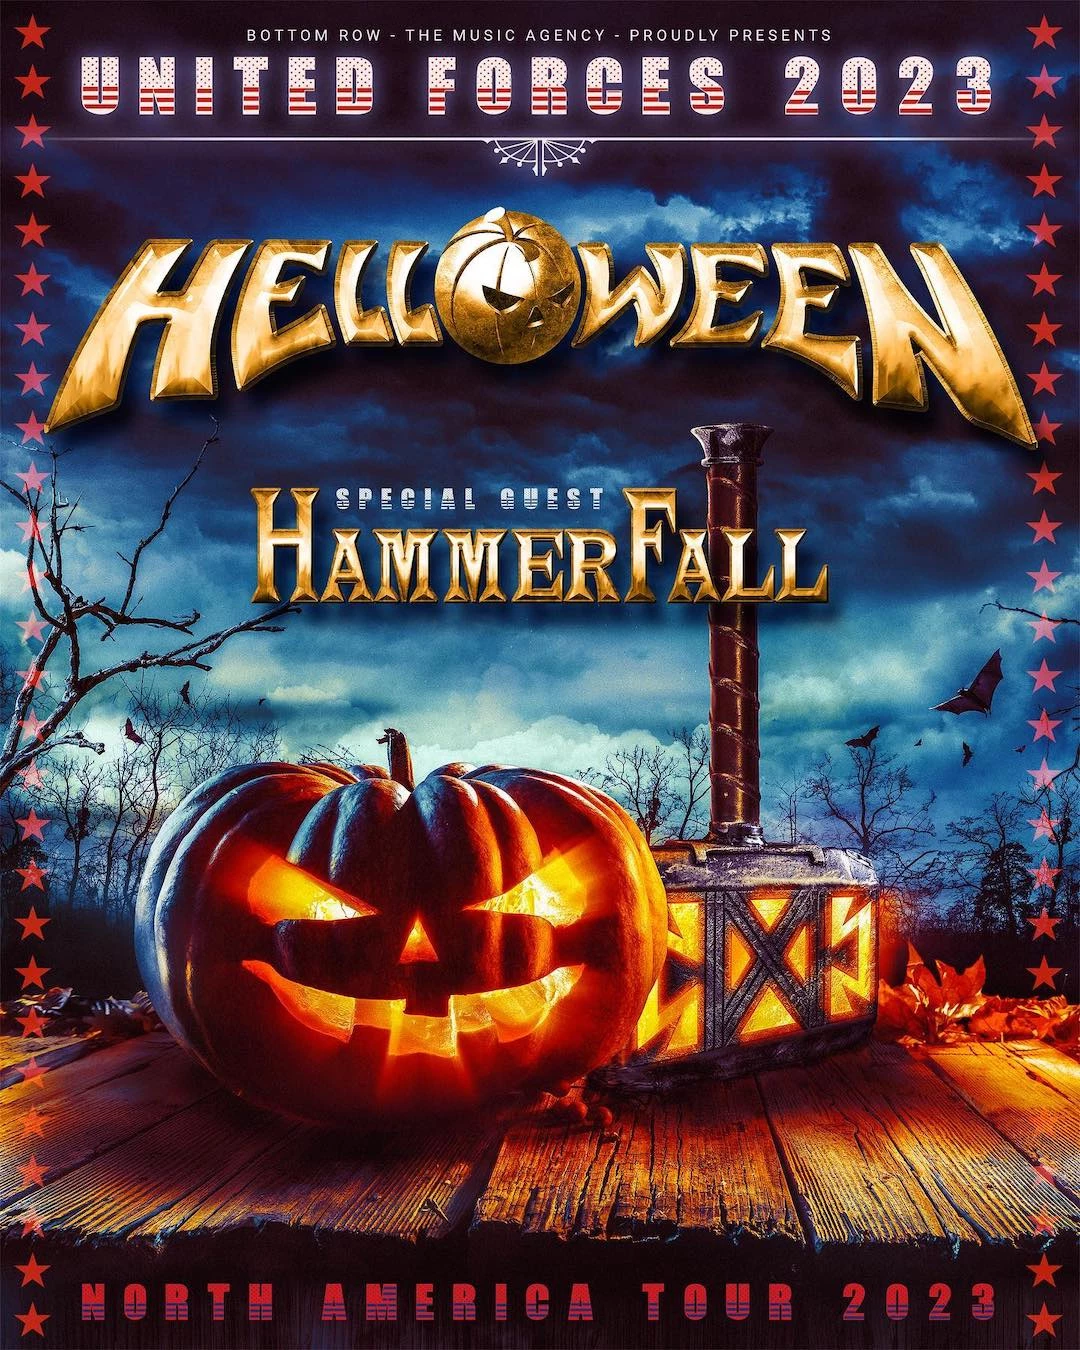 HELLOWEEN Announce 2023 North American Tour With HAMMERFALL Ultimate